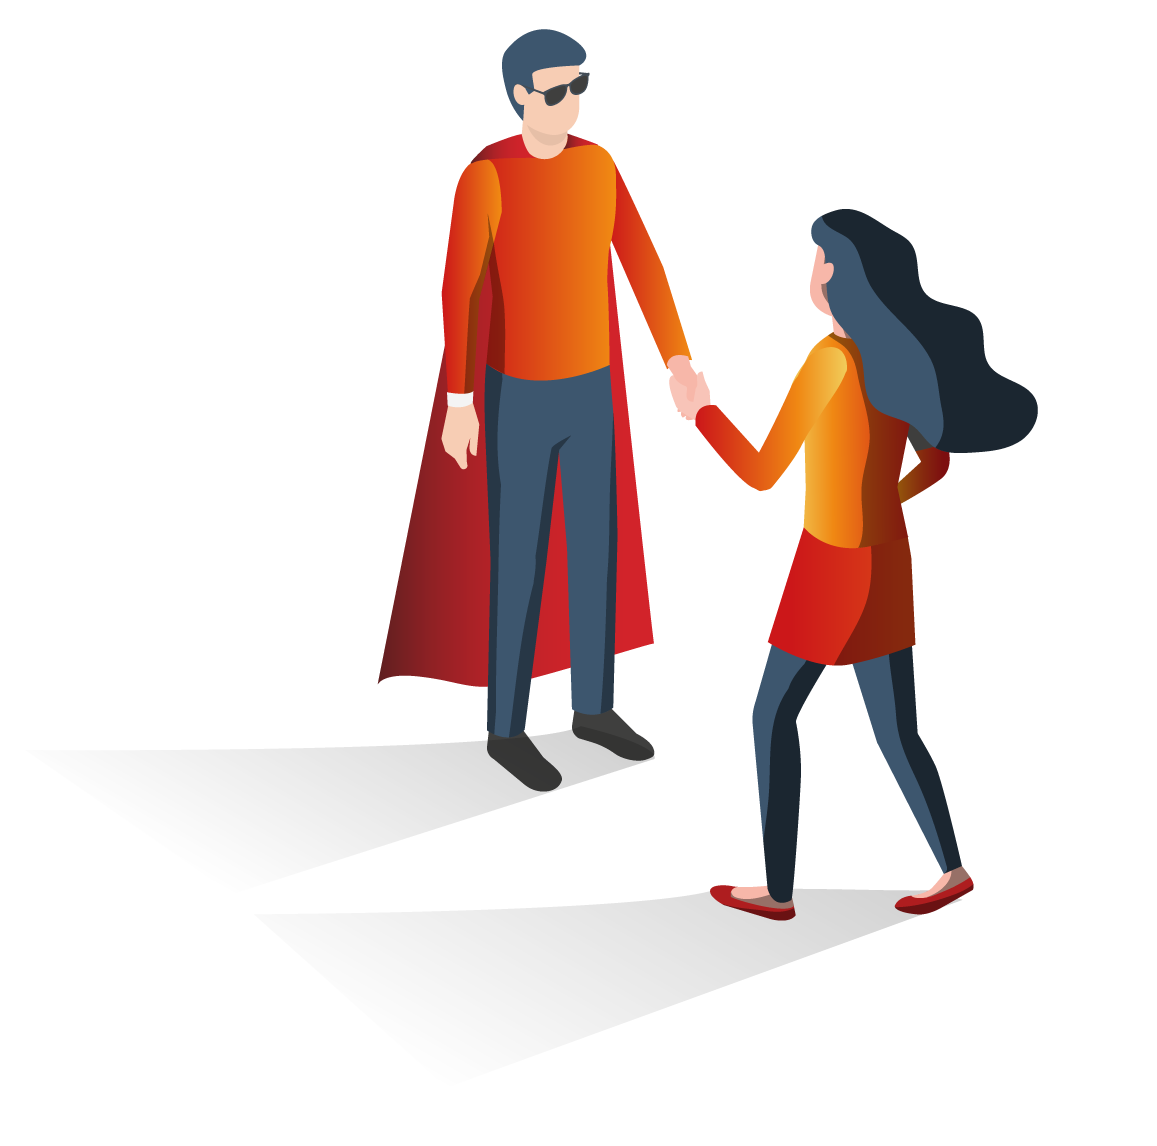 Cybermaniacs graphic of man and woman shaking hands